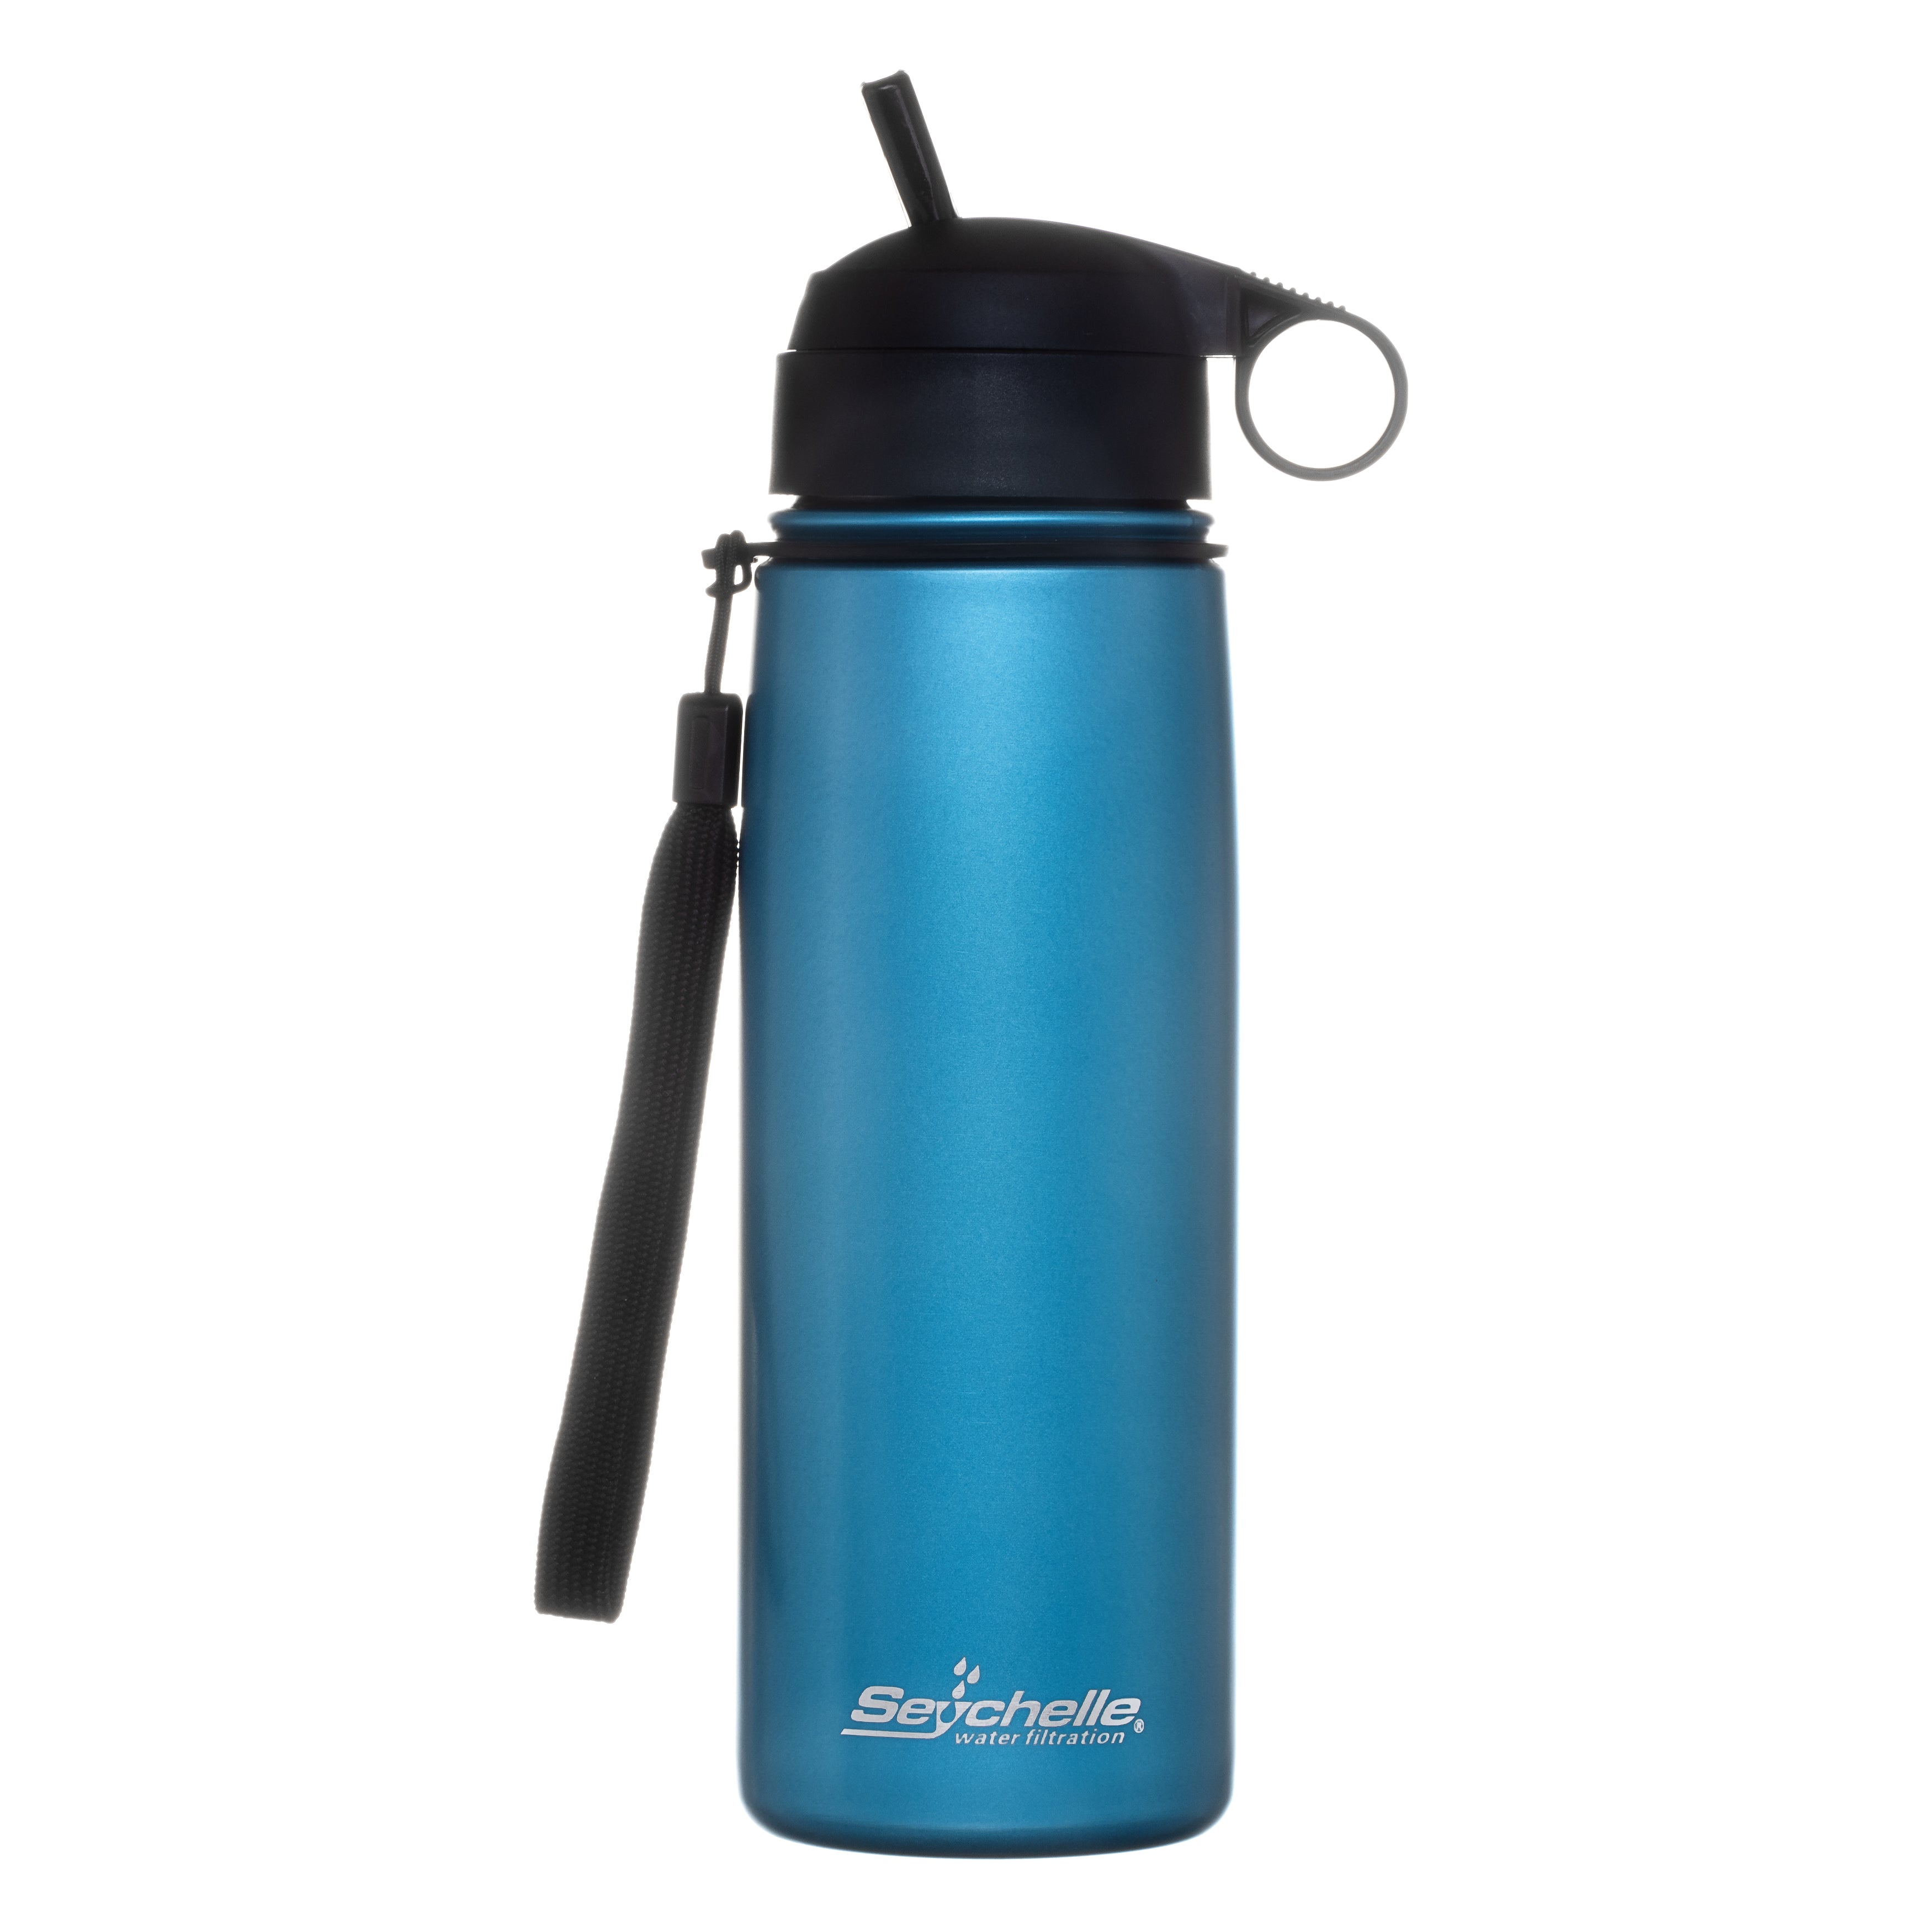 26oz pH Stainless Steel Thermal Bottle